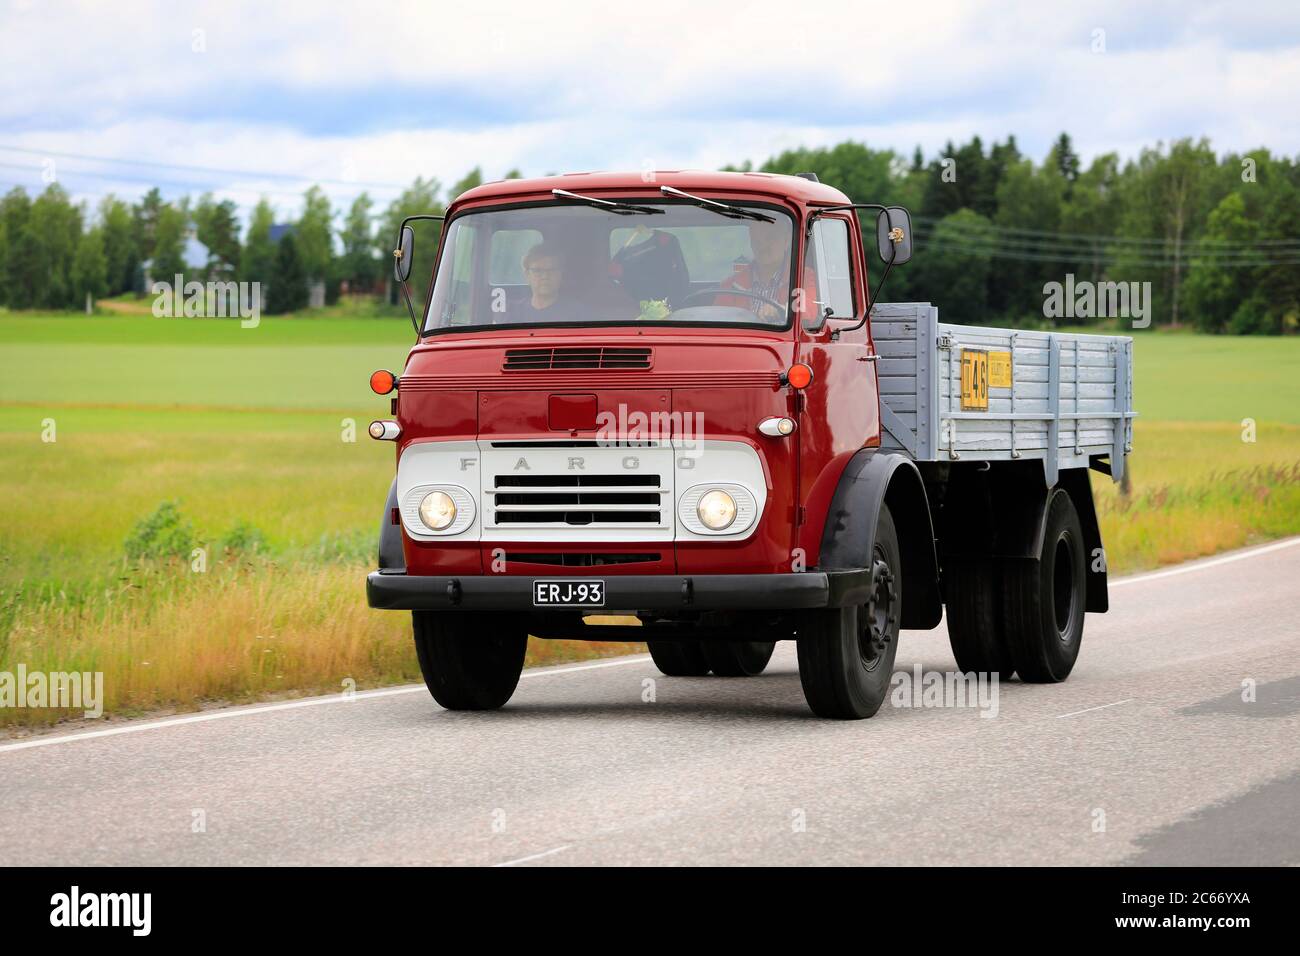 Red Fargo tipper truck on vintage truck rally by The Vintage Truck  Association of Finland. Suomusjärvi, Finland. July 4, 2020 Stock Photo -  Alamy